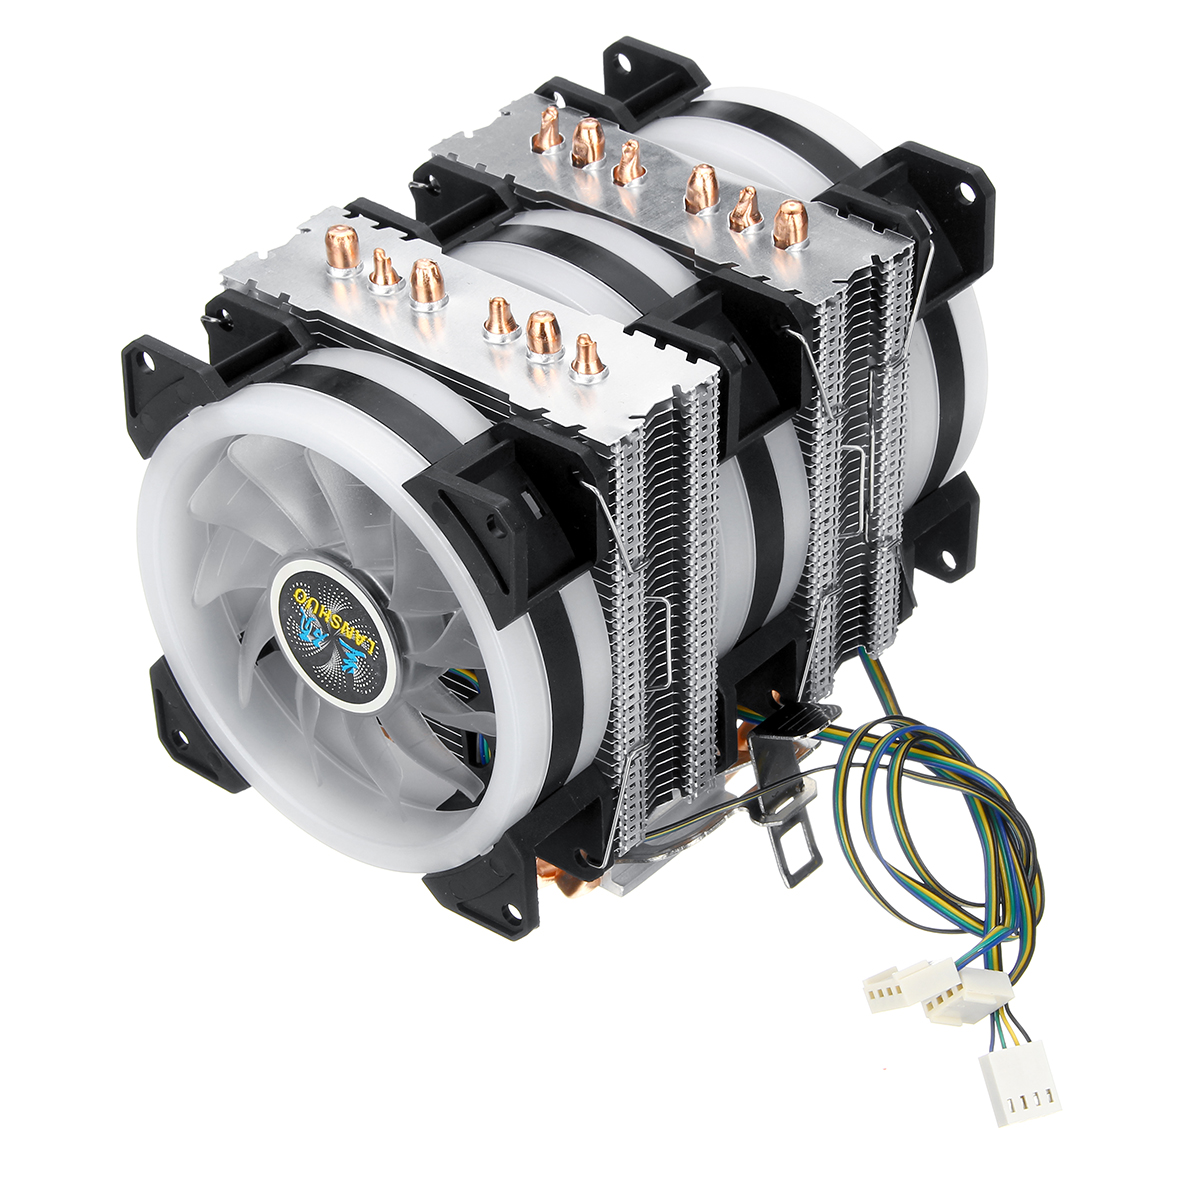 Find CPU Cooler 6 Heatpipe 4 Pin RGB Cooling Fan For Intel 775/1150/1151/1155/1156/1366 AMD for Sale on Gipsybee.com with cryptocurrencies